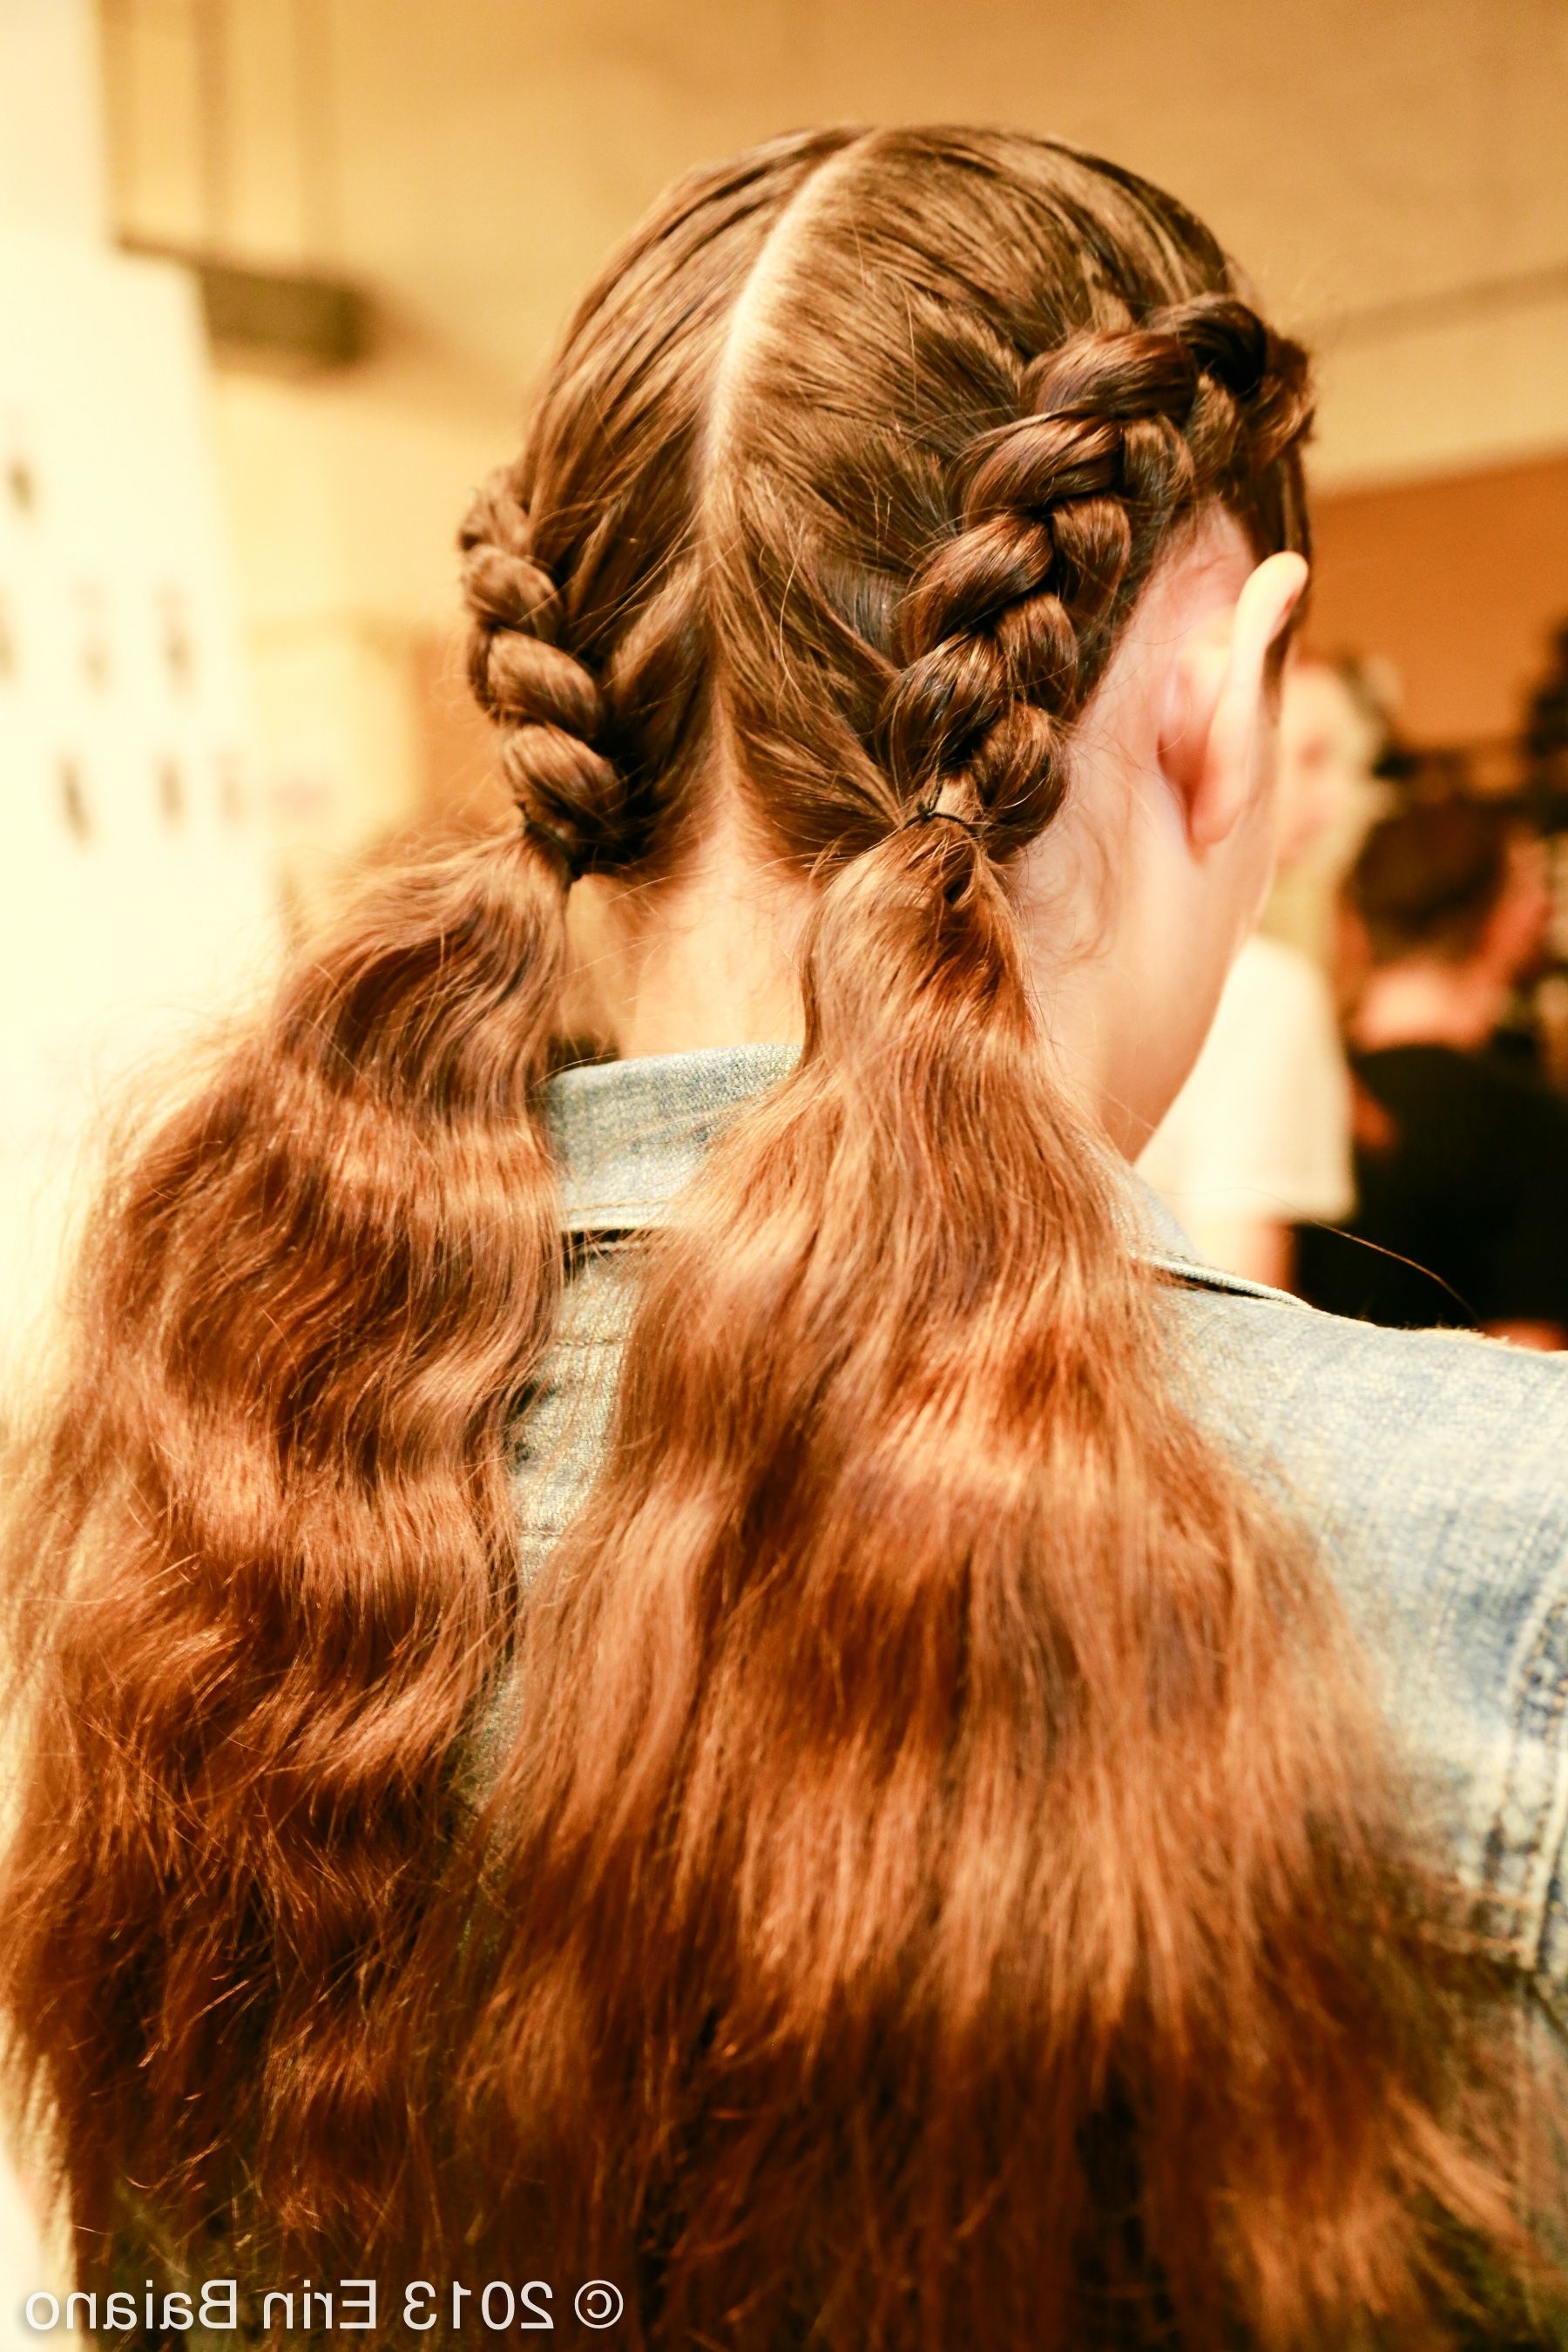 Fall Hair Trend For Tweens & Moms – Braids Regarding Famous Loose Hair With Double French Braids (View 5 of 15)